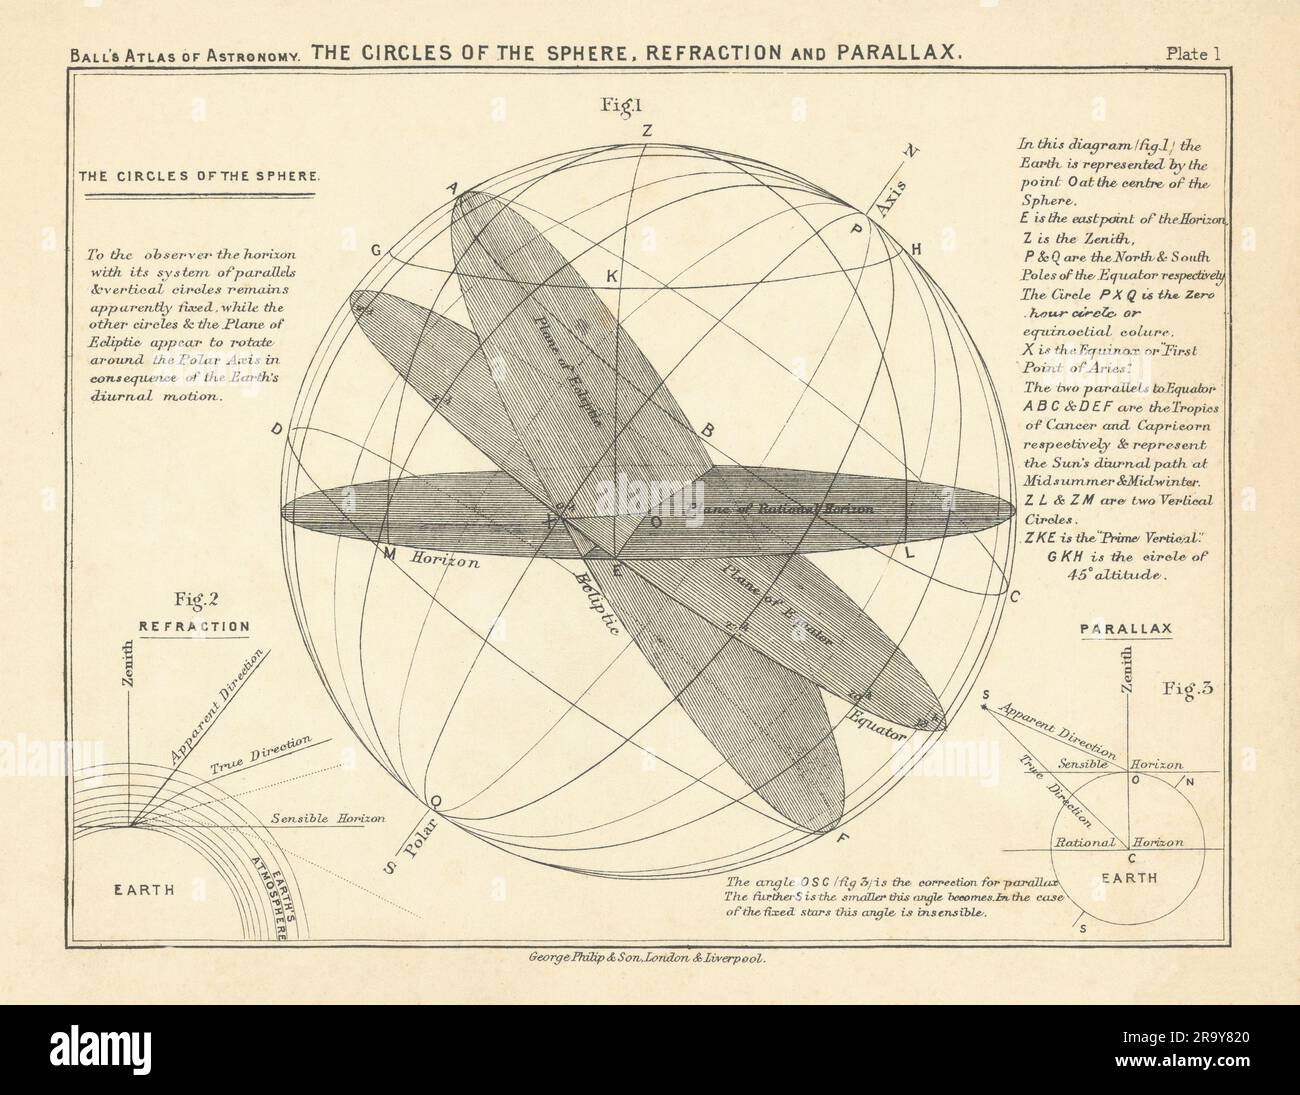 The Circles of the Sphere, Refraction & Parallax di Robert Ball. Astronomia 1892 Foto Stock